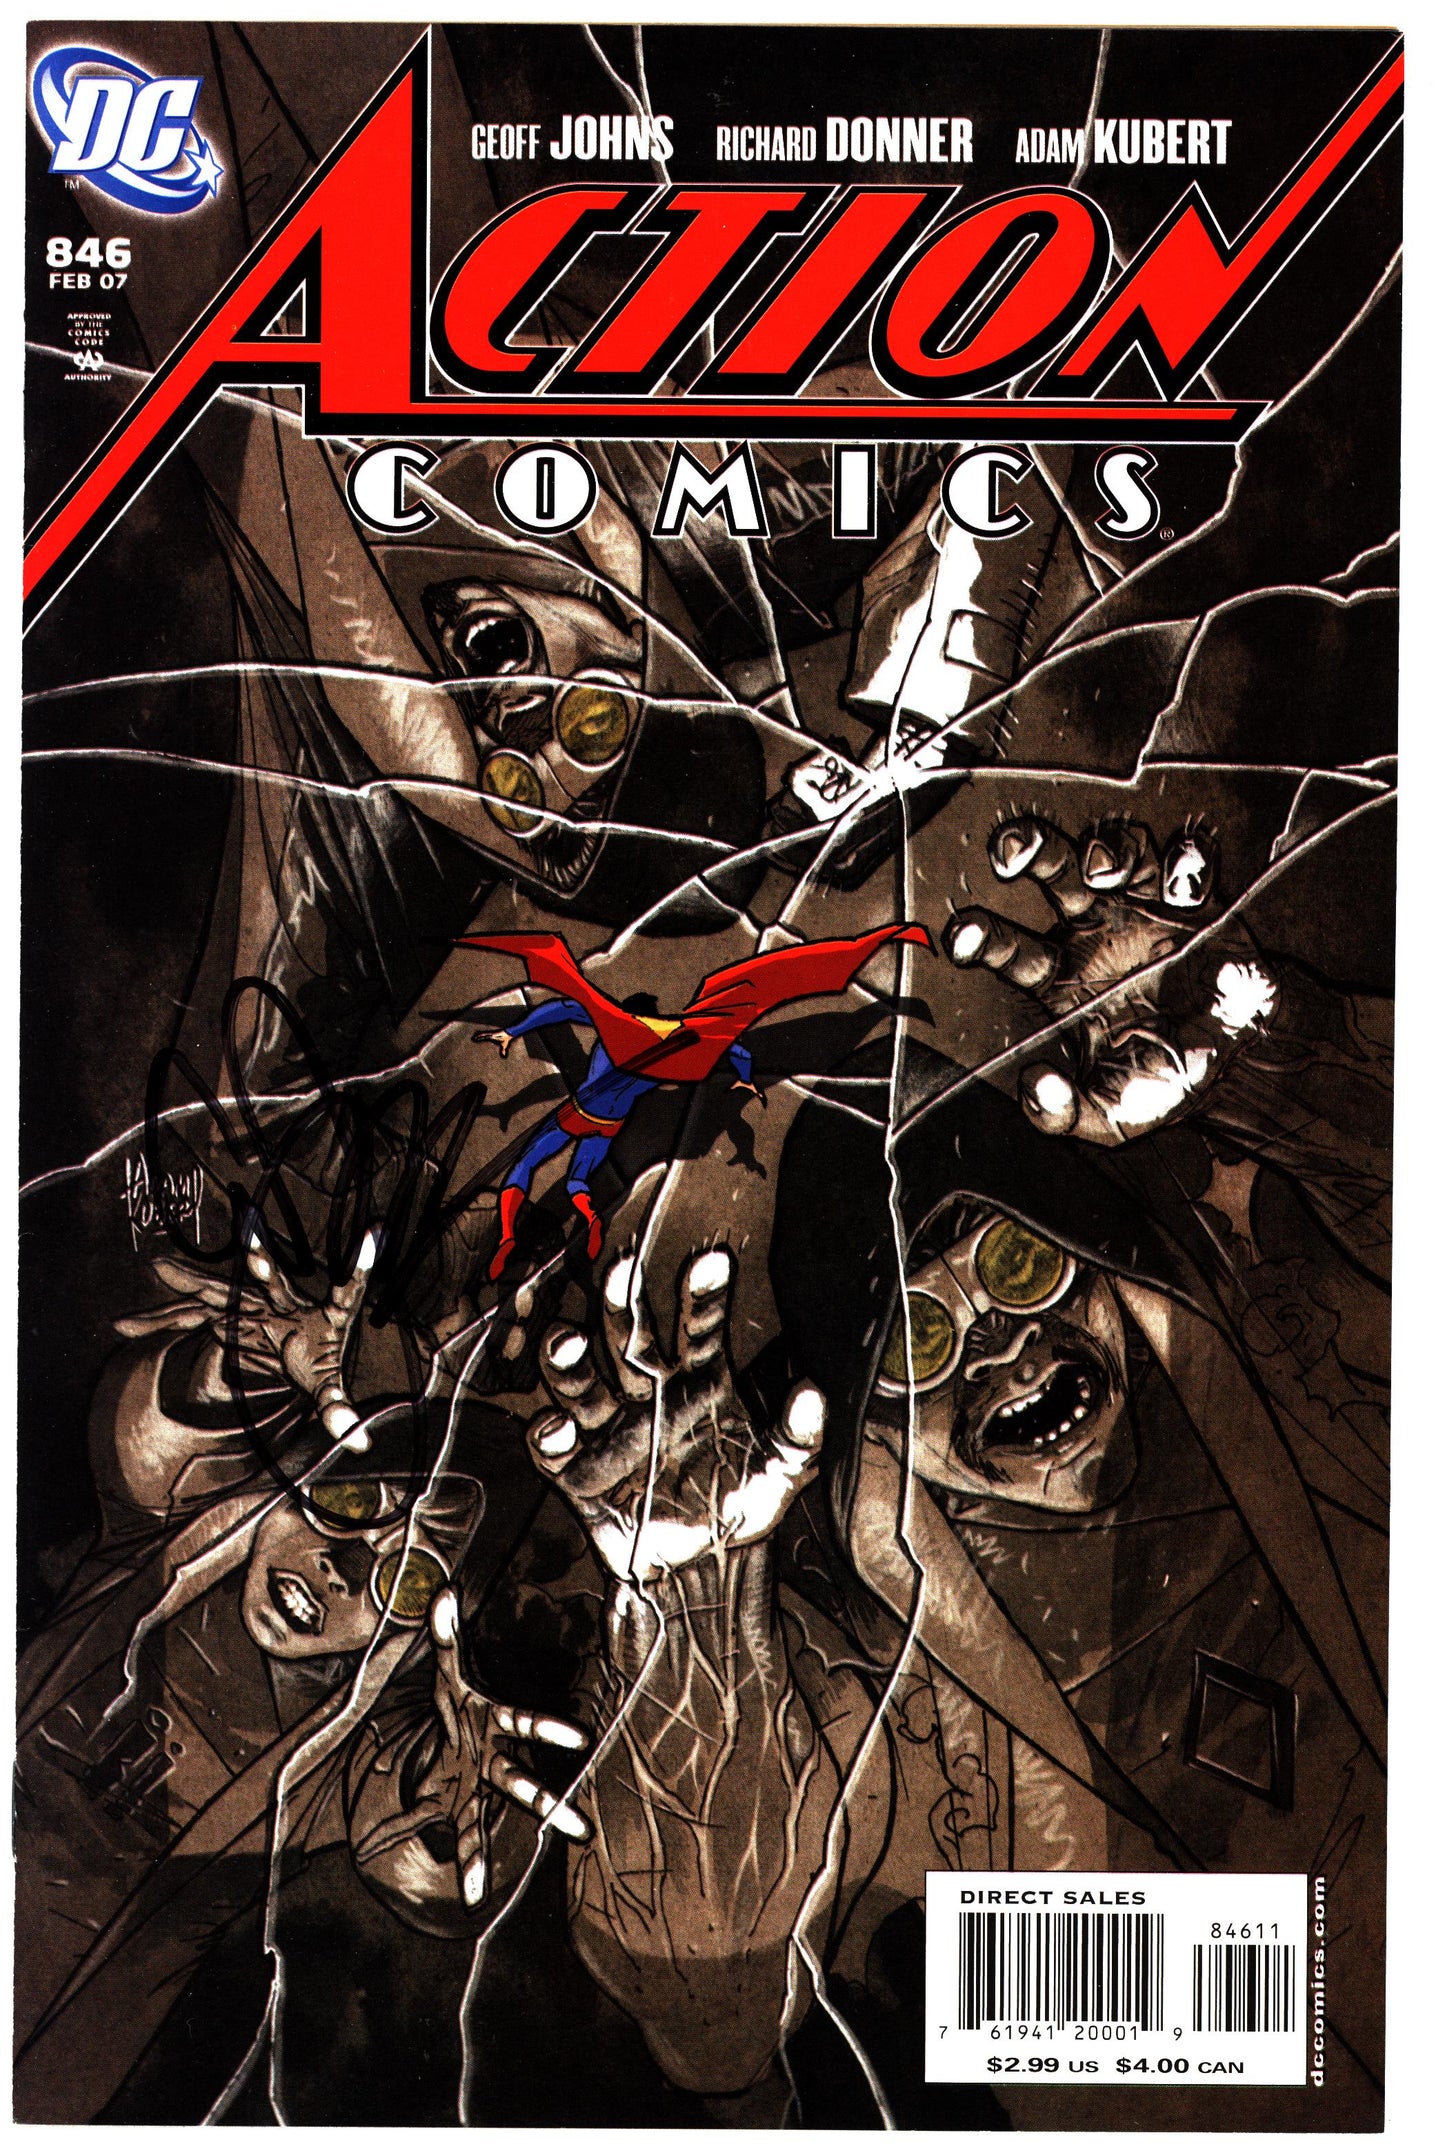 Action Comics (1938) #846 - Signed